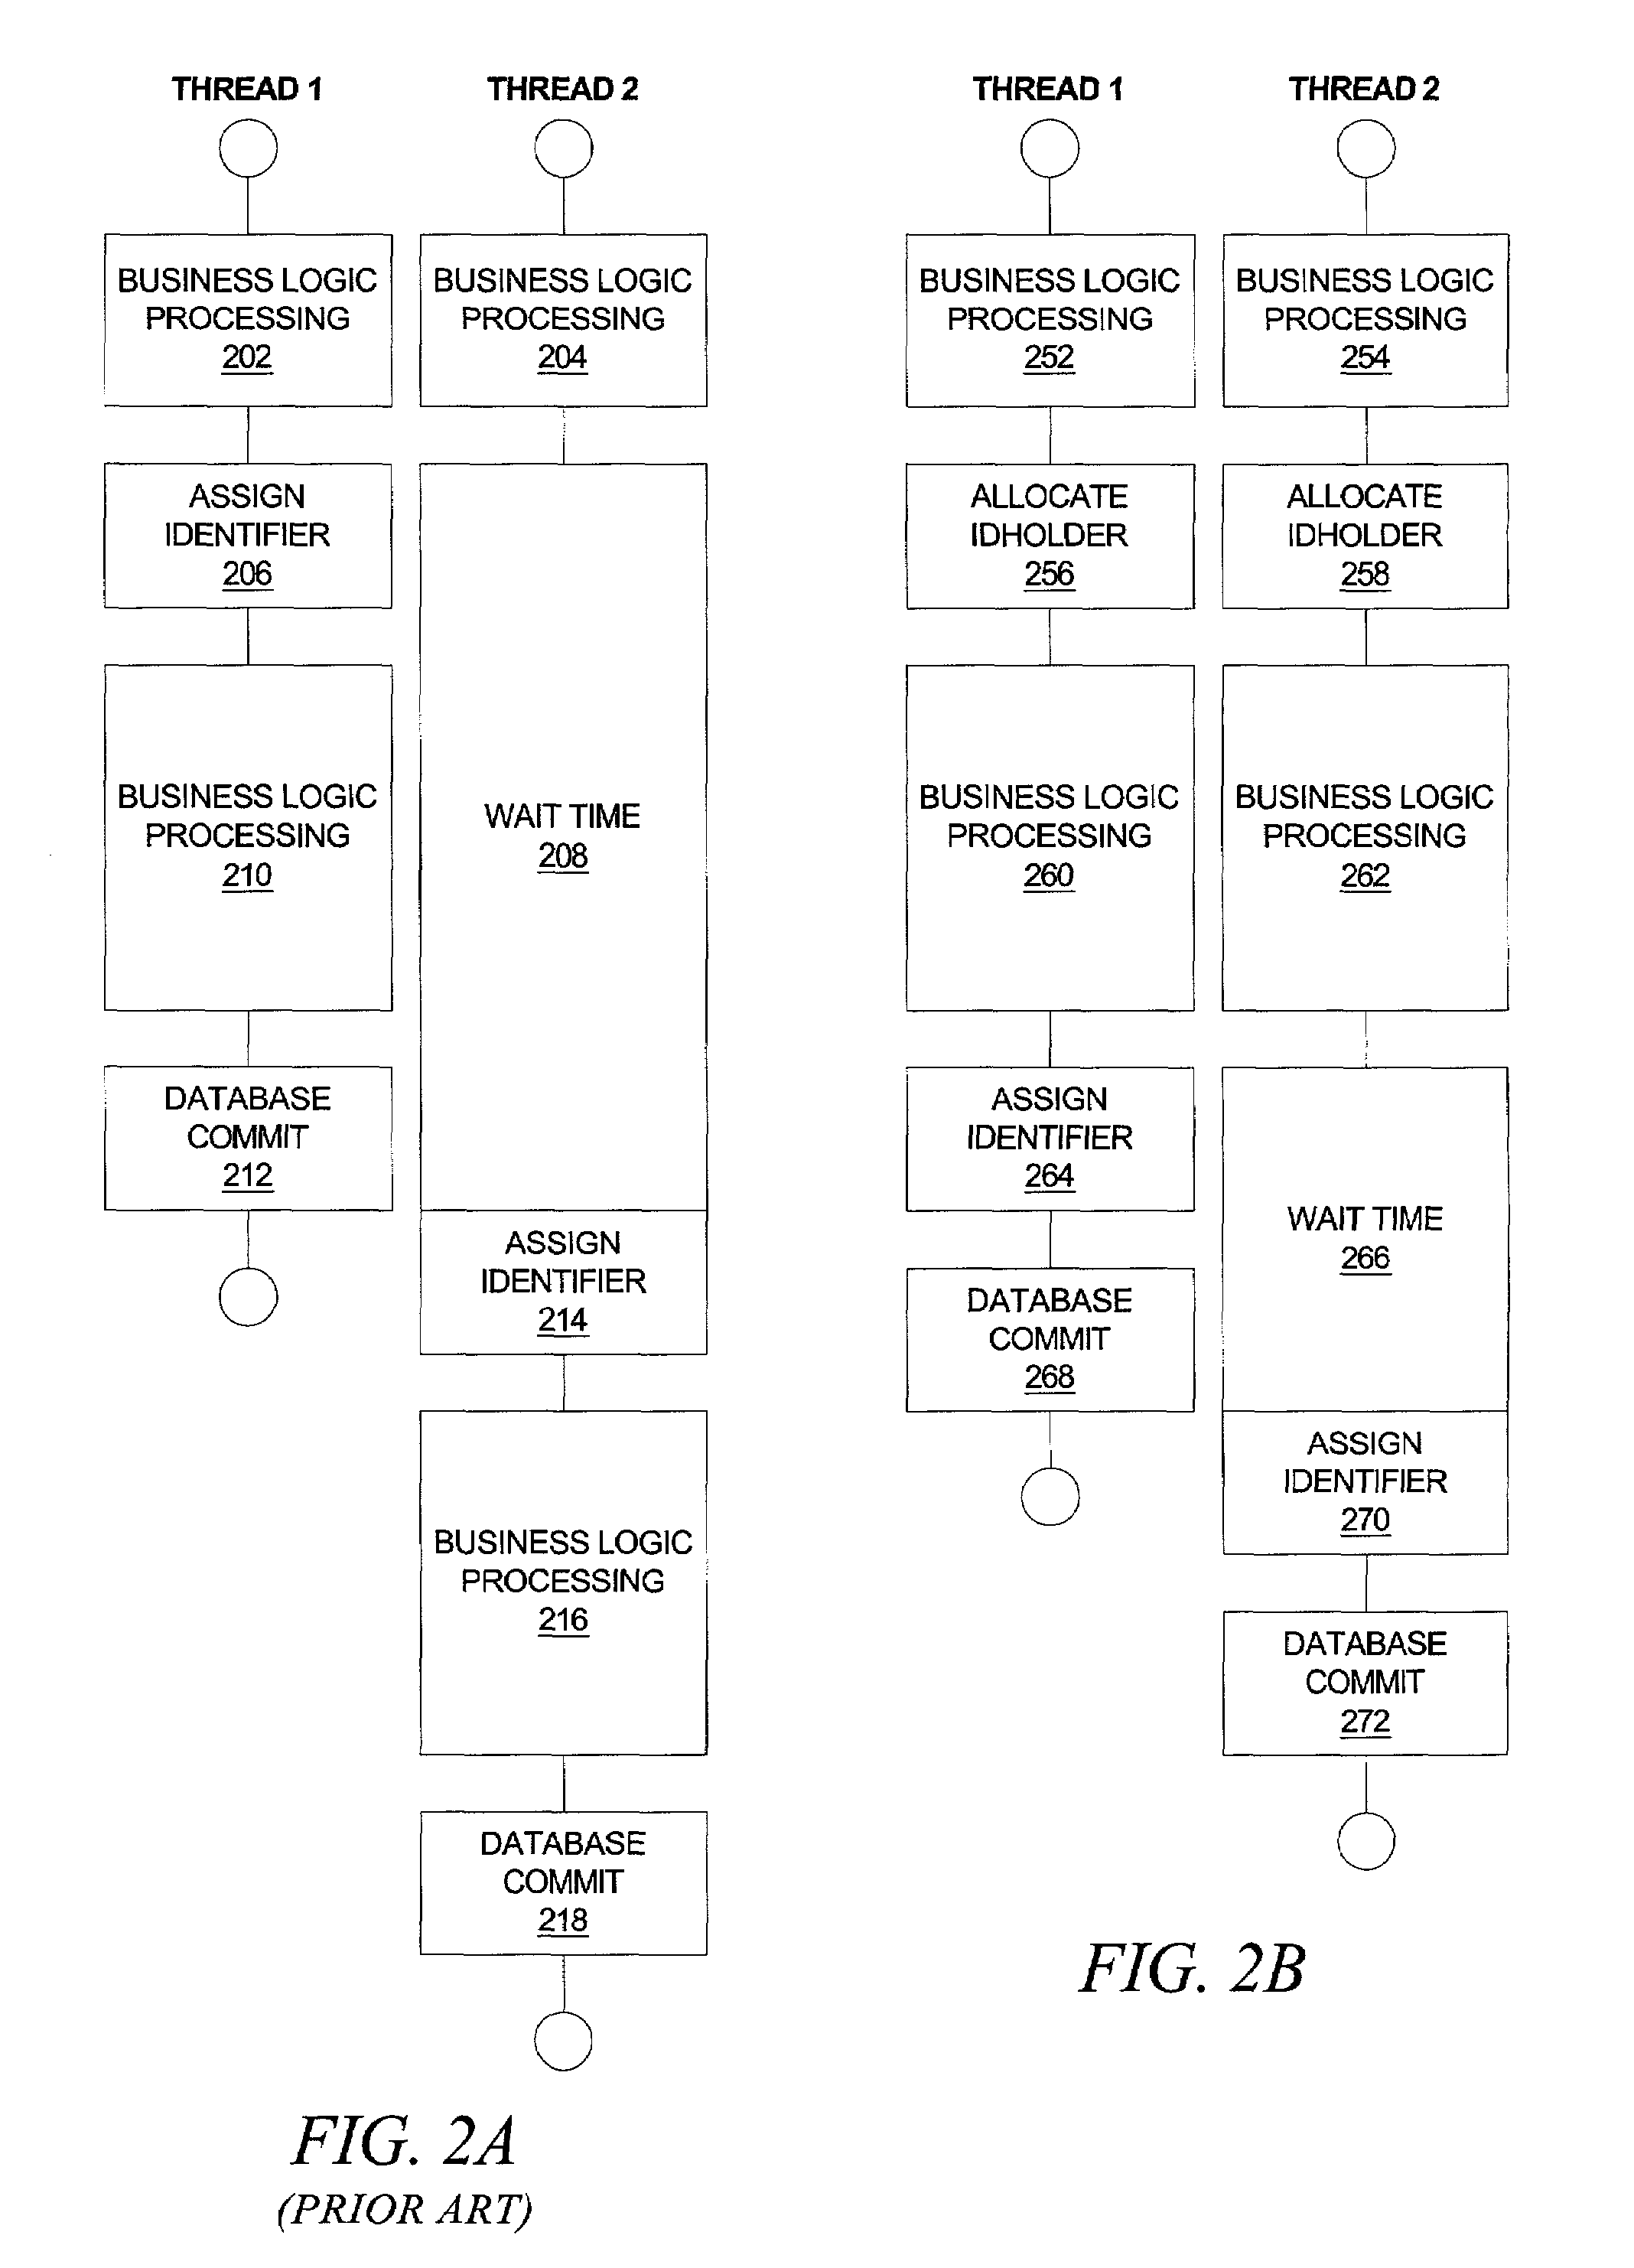 Method and system for reducing synchronization waits when allocating sequenced identifiers in a multi-threaded server